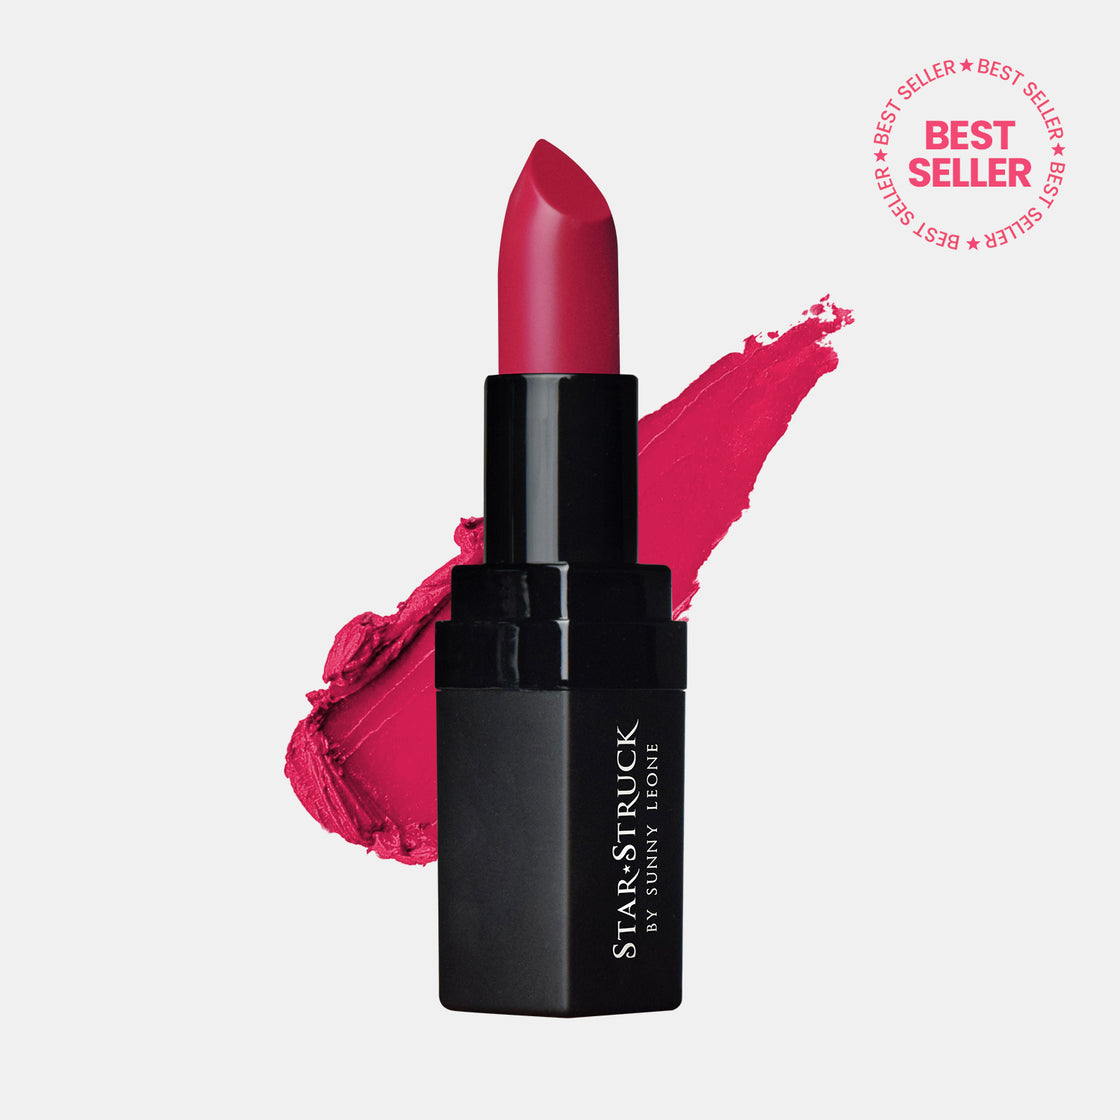 Rooberry - Luxe Matte Lipstick, Berry Pink | 4.2gms